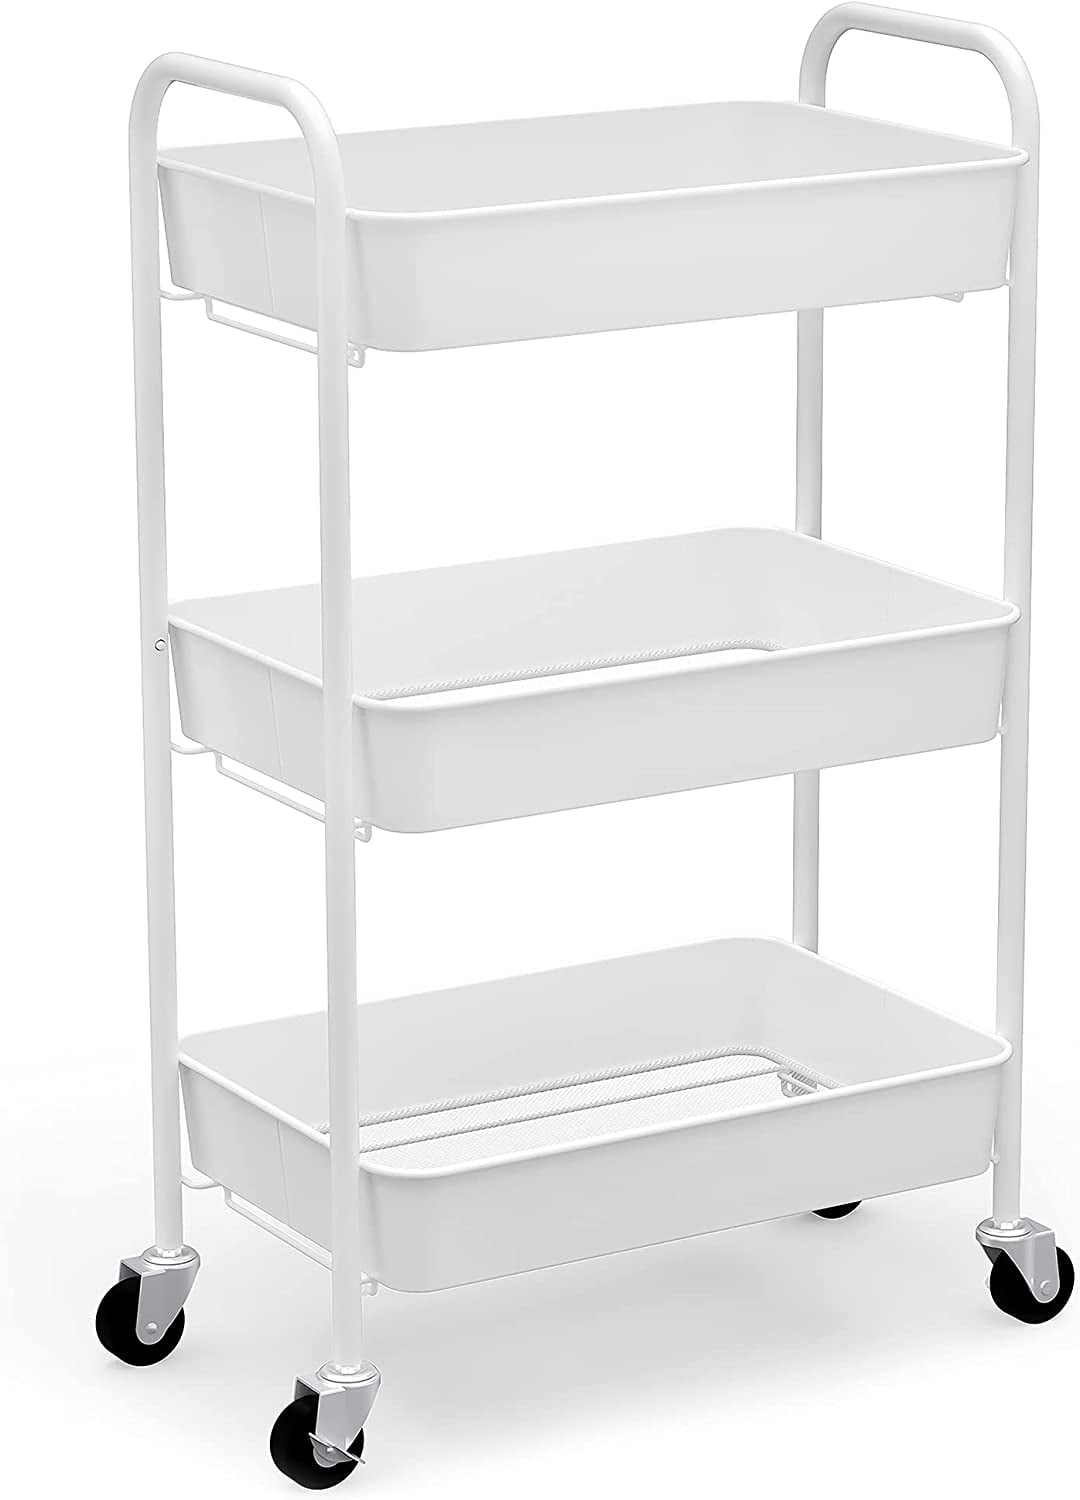 MLMLH 3-Tier Rolling Metal Storage Organizer - Mobile Utility Cart Kitchen Cart with Caster Wheels， White